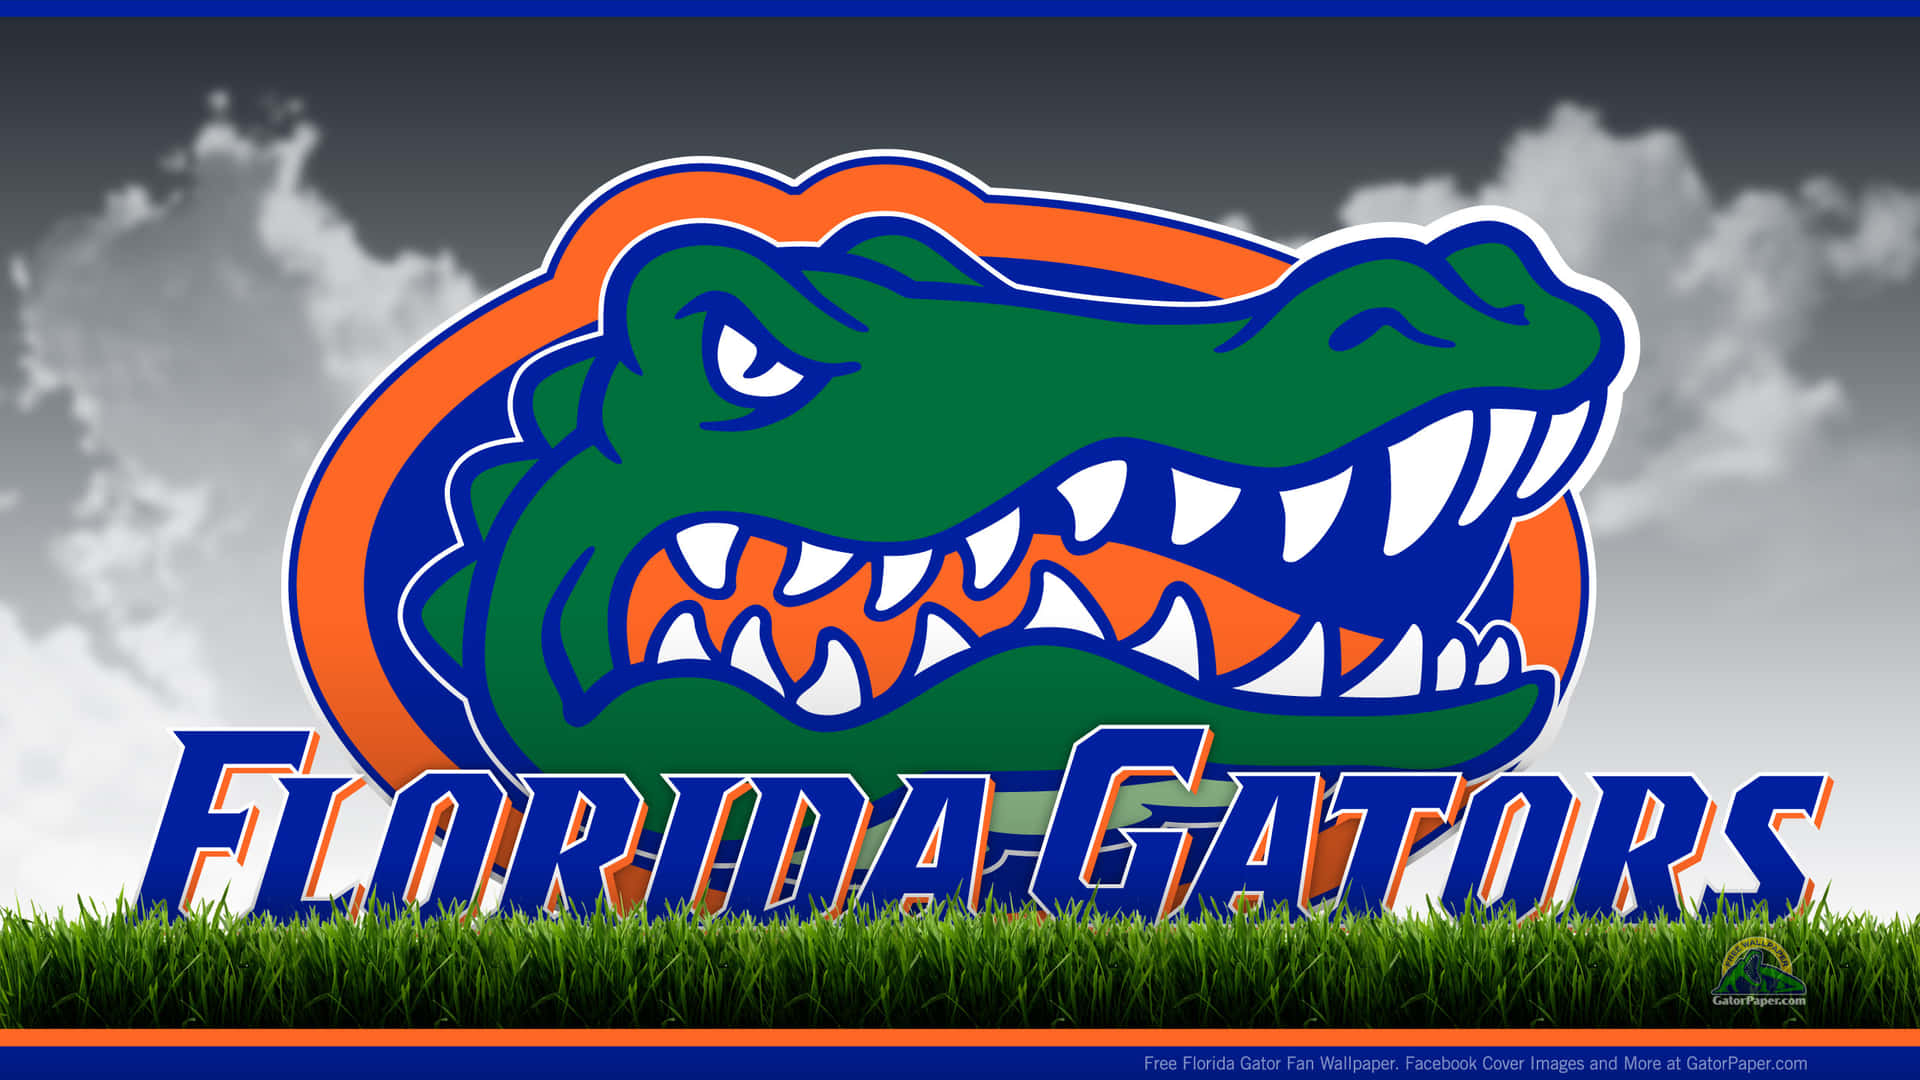 The Florida Gators Logo Is Shown In The Grass Wallpaper